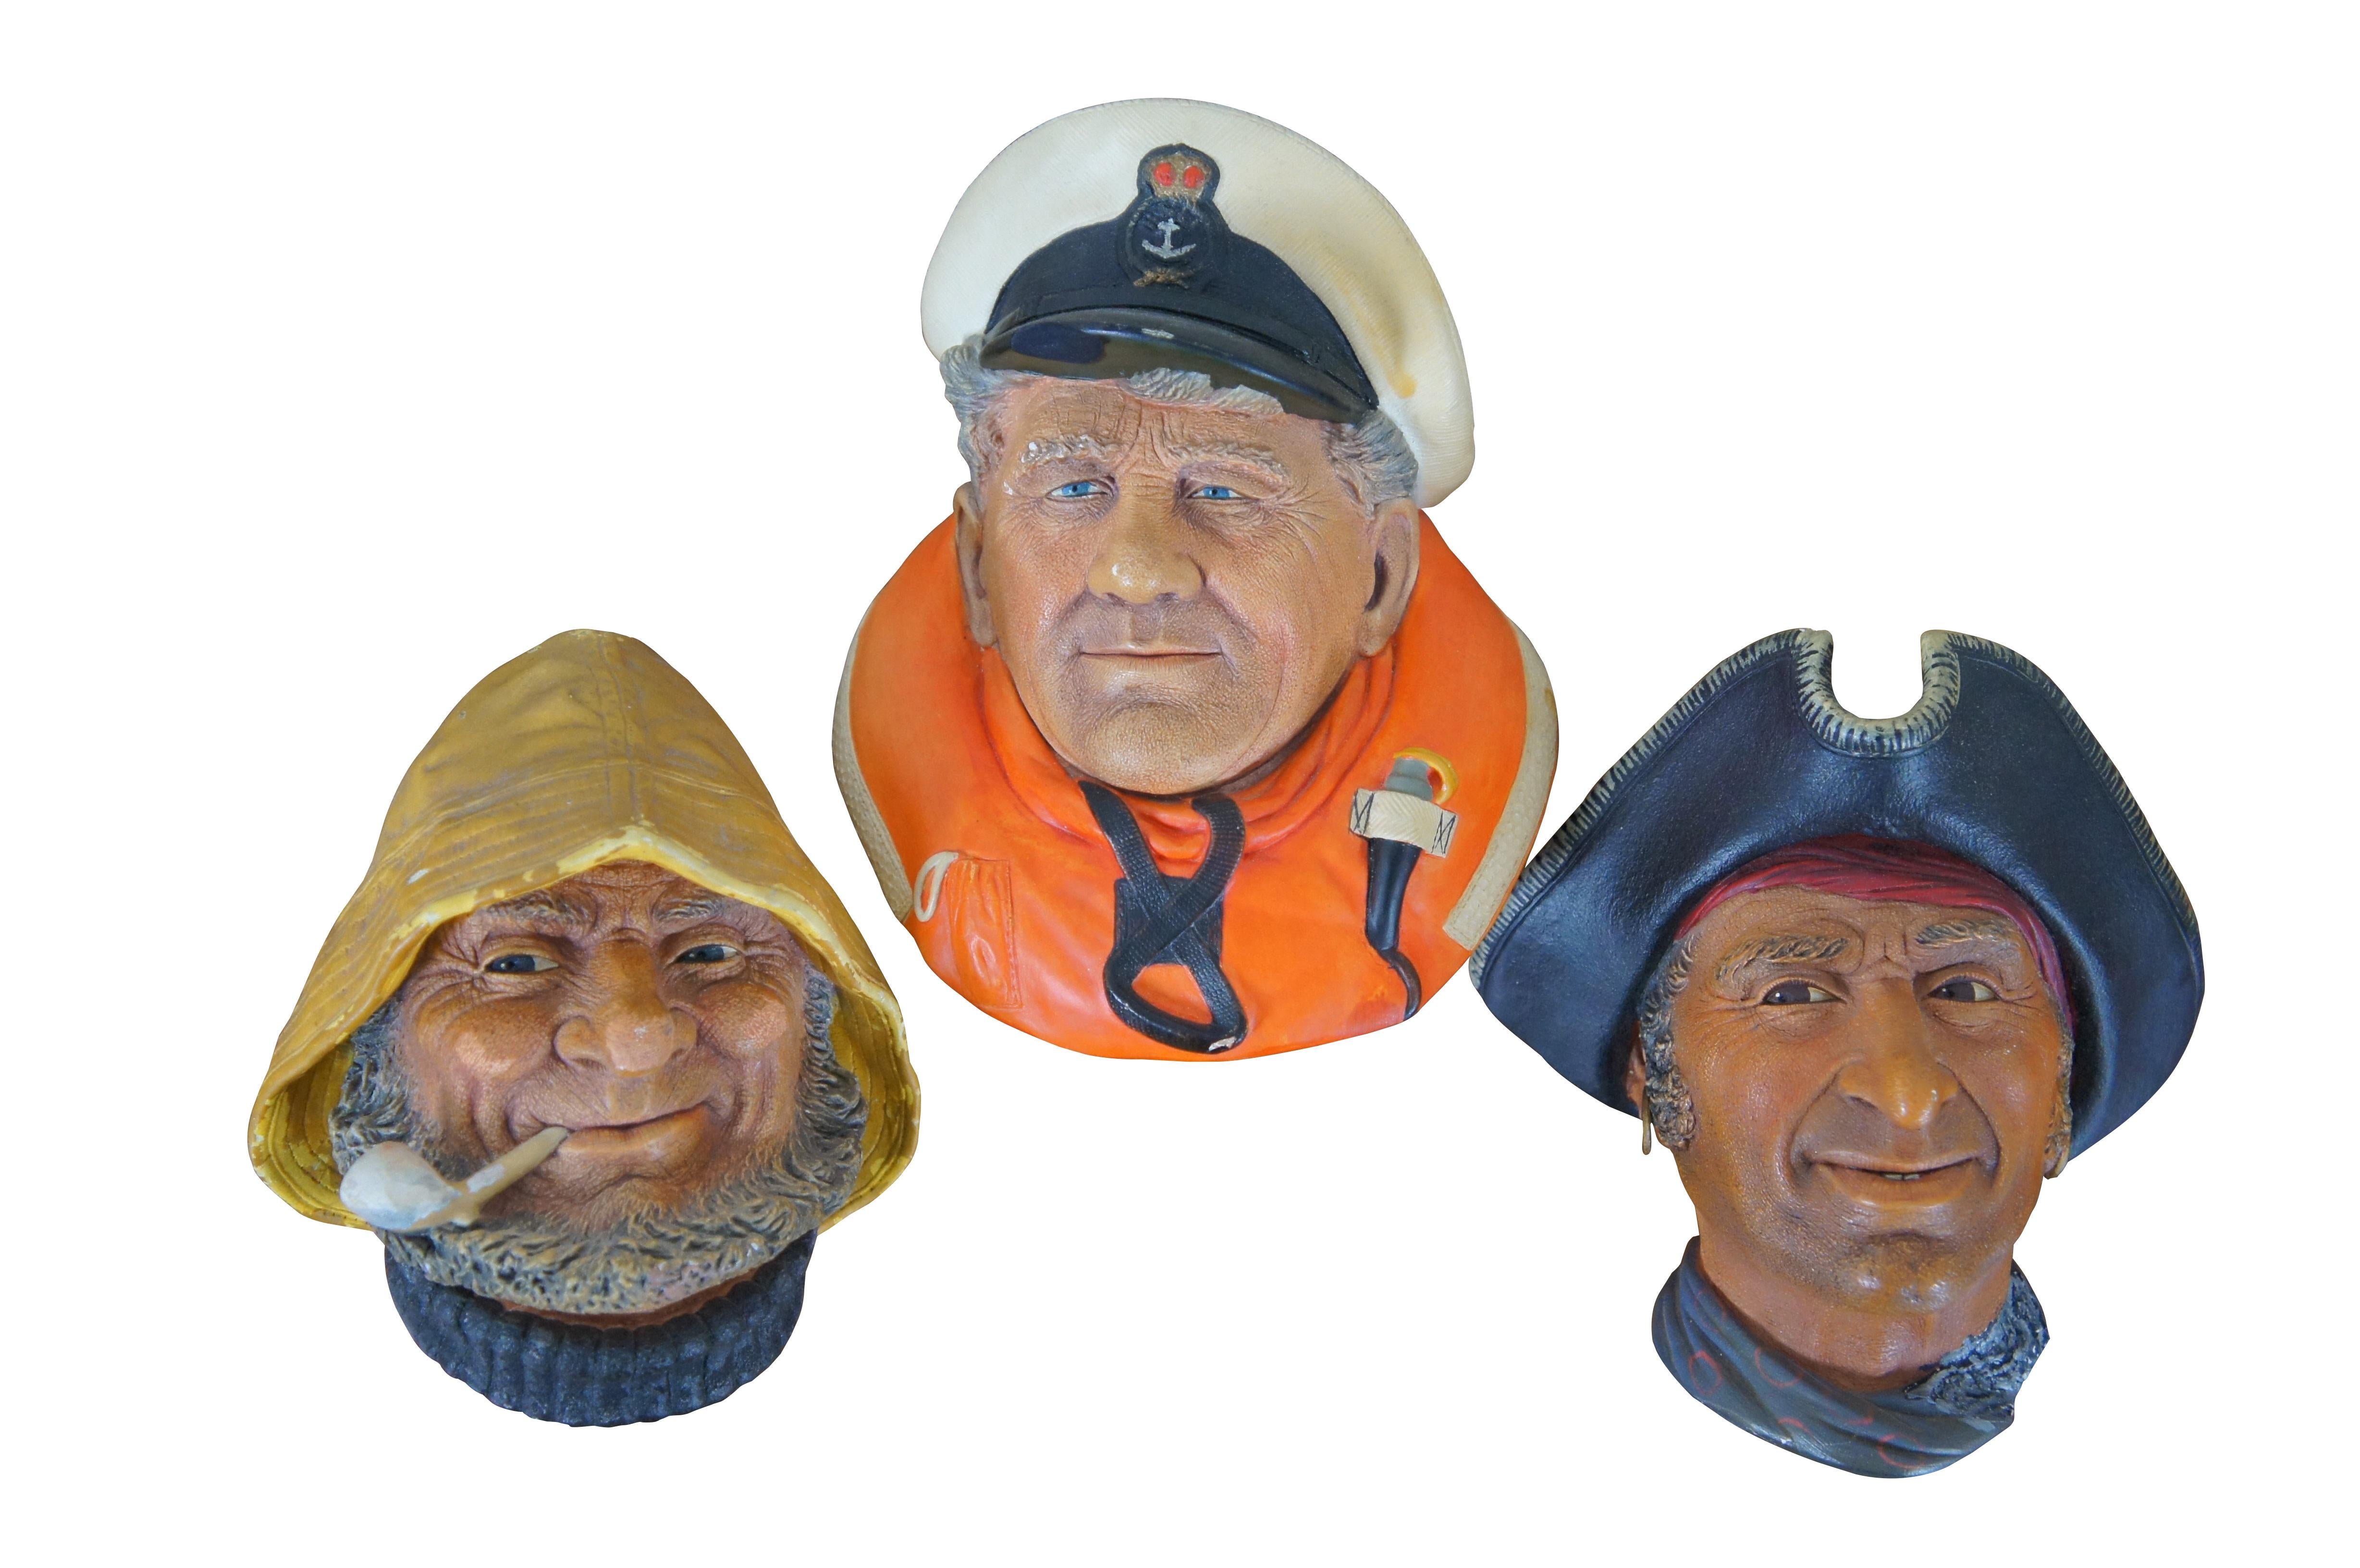 Six Bosson’s painted chalkware wall hanging busts / heads representing seamen / sailors through the centuries, including Boatman 1967, Old Salt 1971, Captain Kidd Privateer 1982, Coxswain 1985, Fisherman 1990, and one unmarked pirate with eye patch